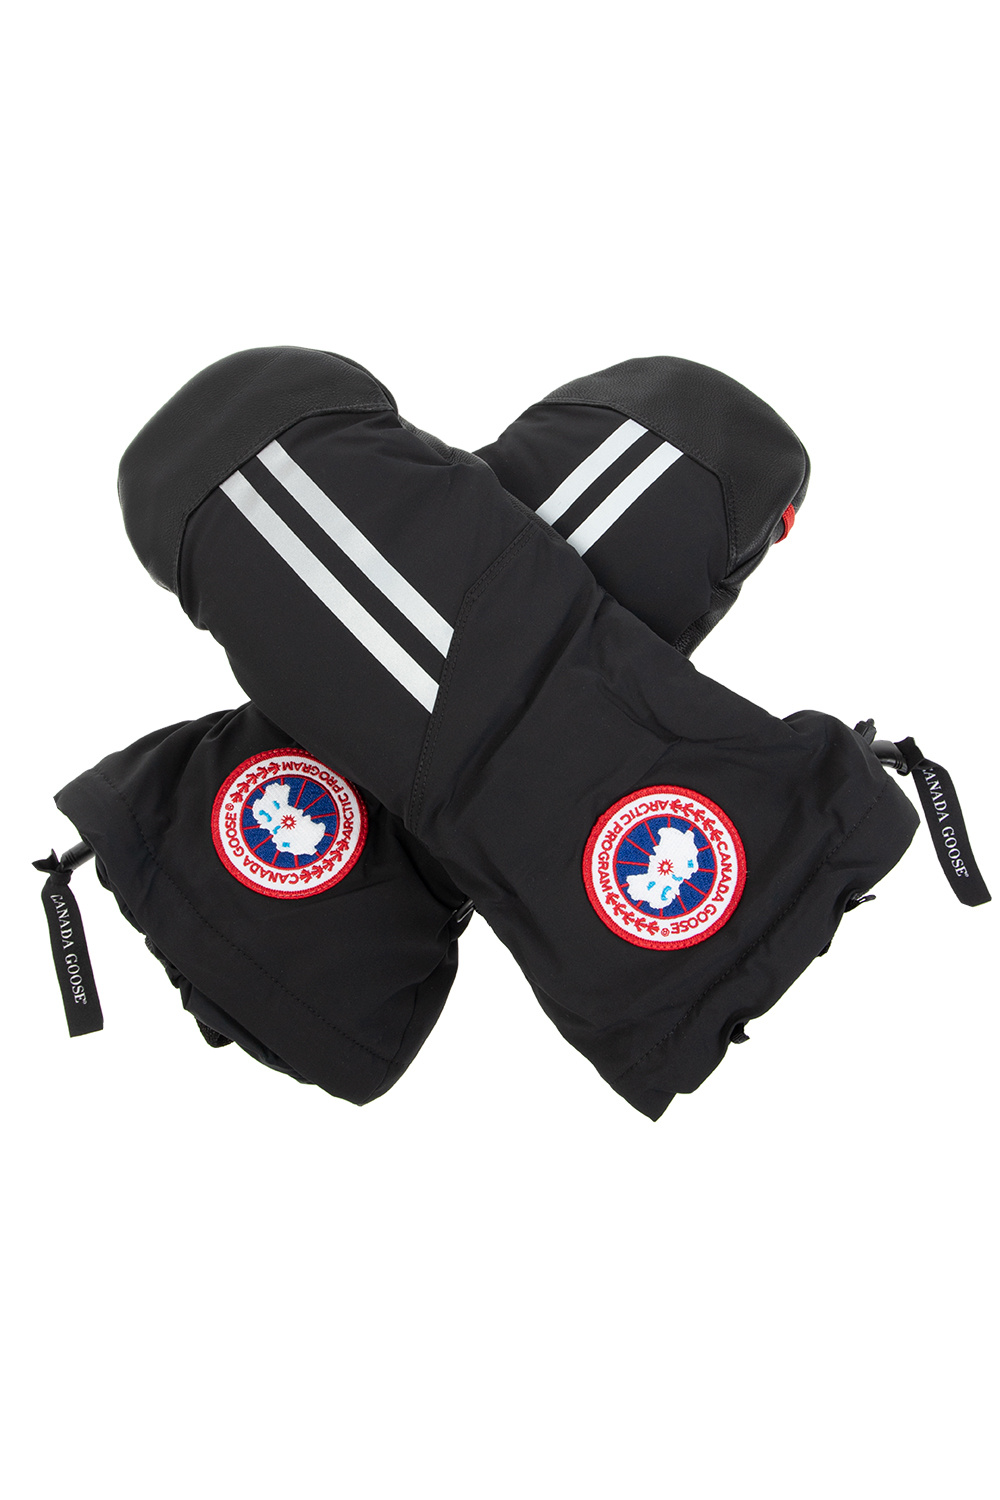 Canada Goose BLACK Gloves with logo